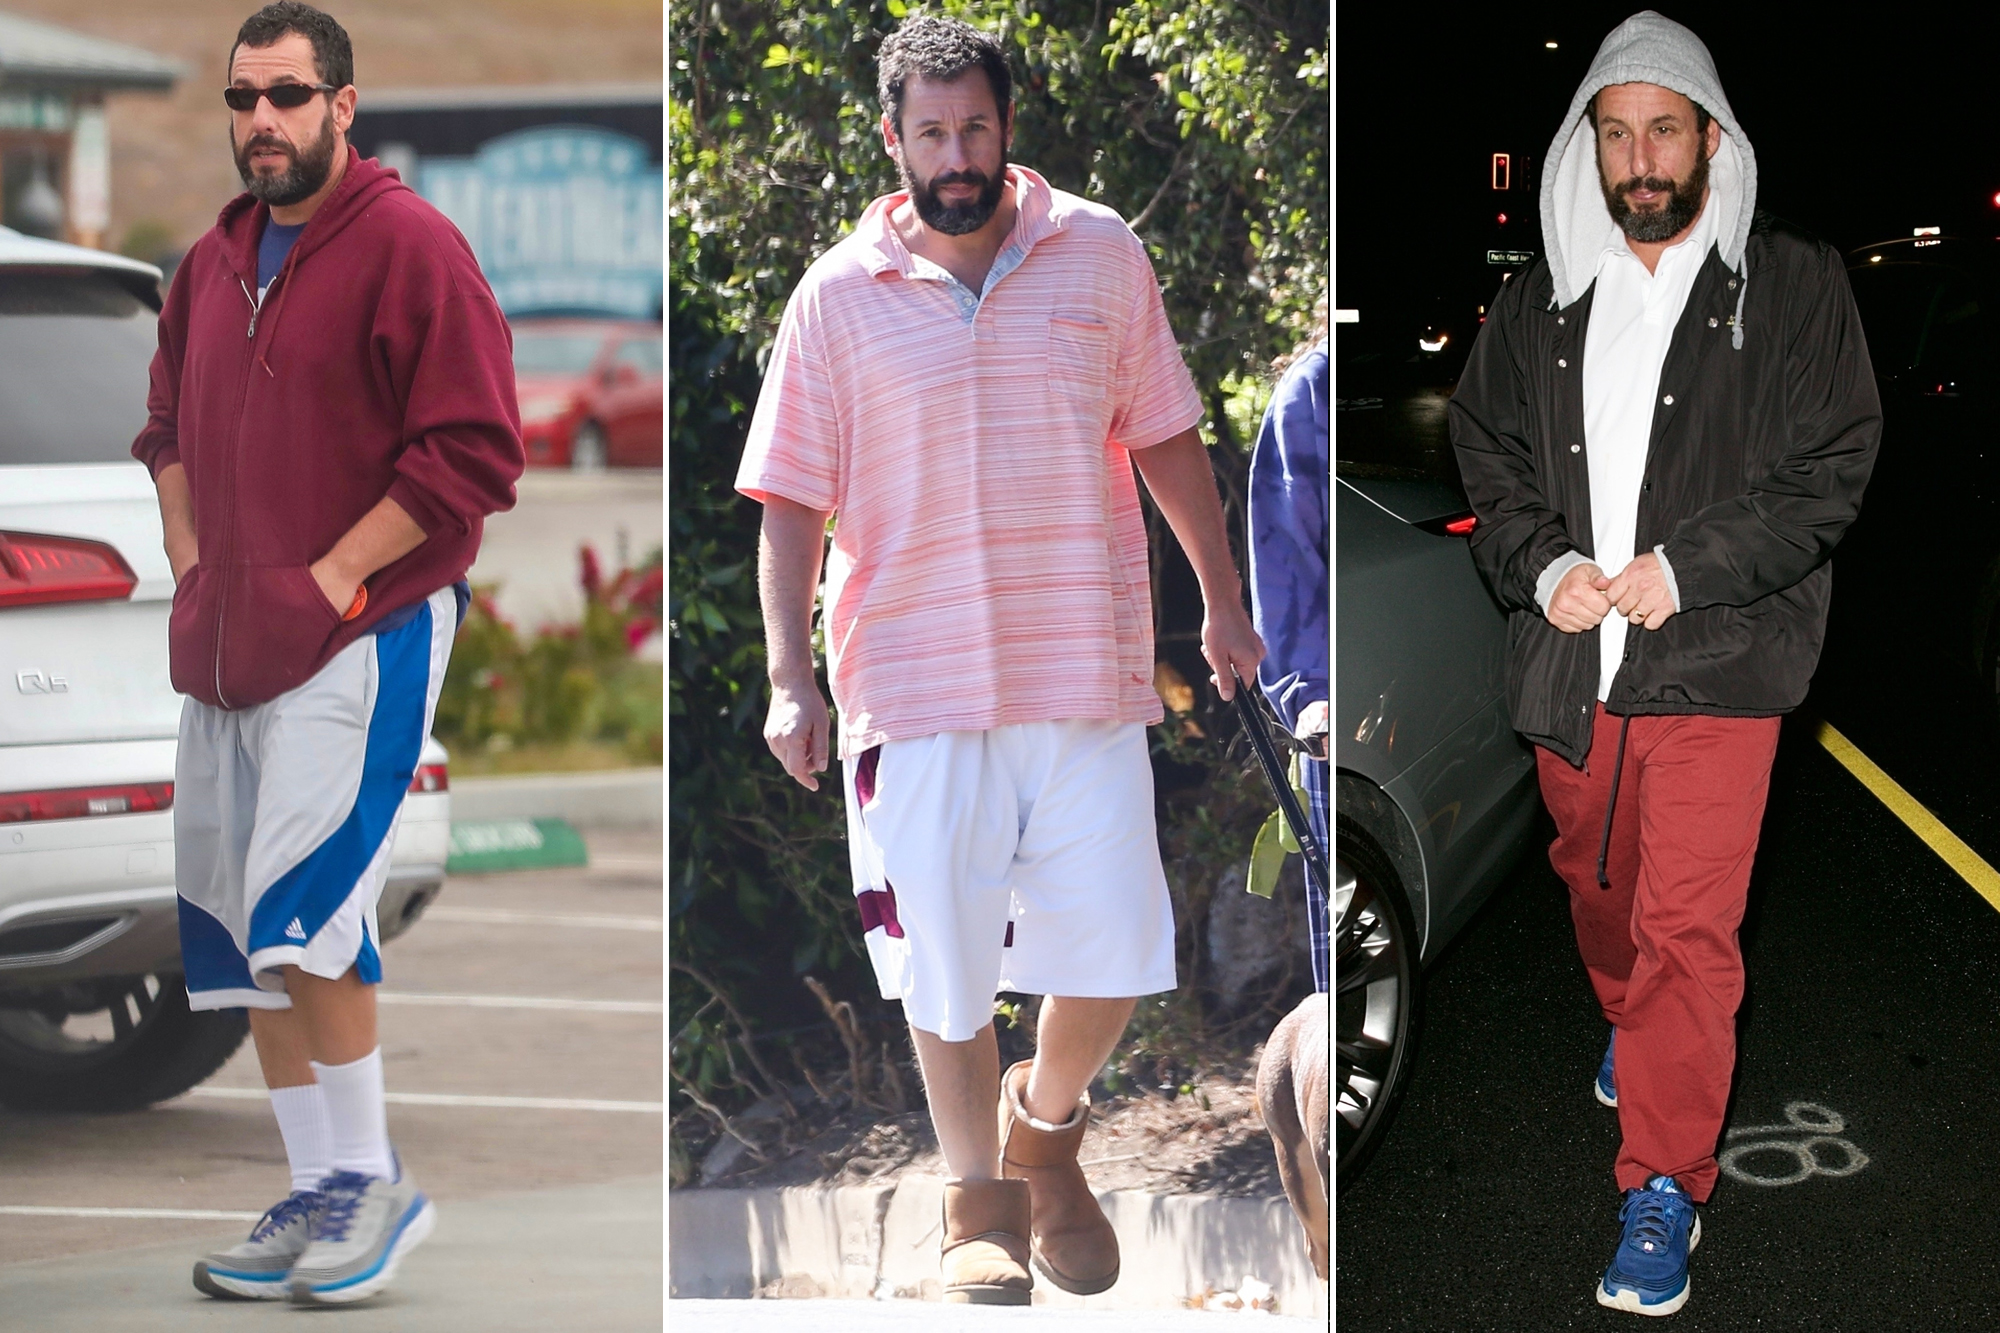 Adam Sandler Is A Fashion Icon-It’s Time We Accept It - NYCTastemakers